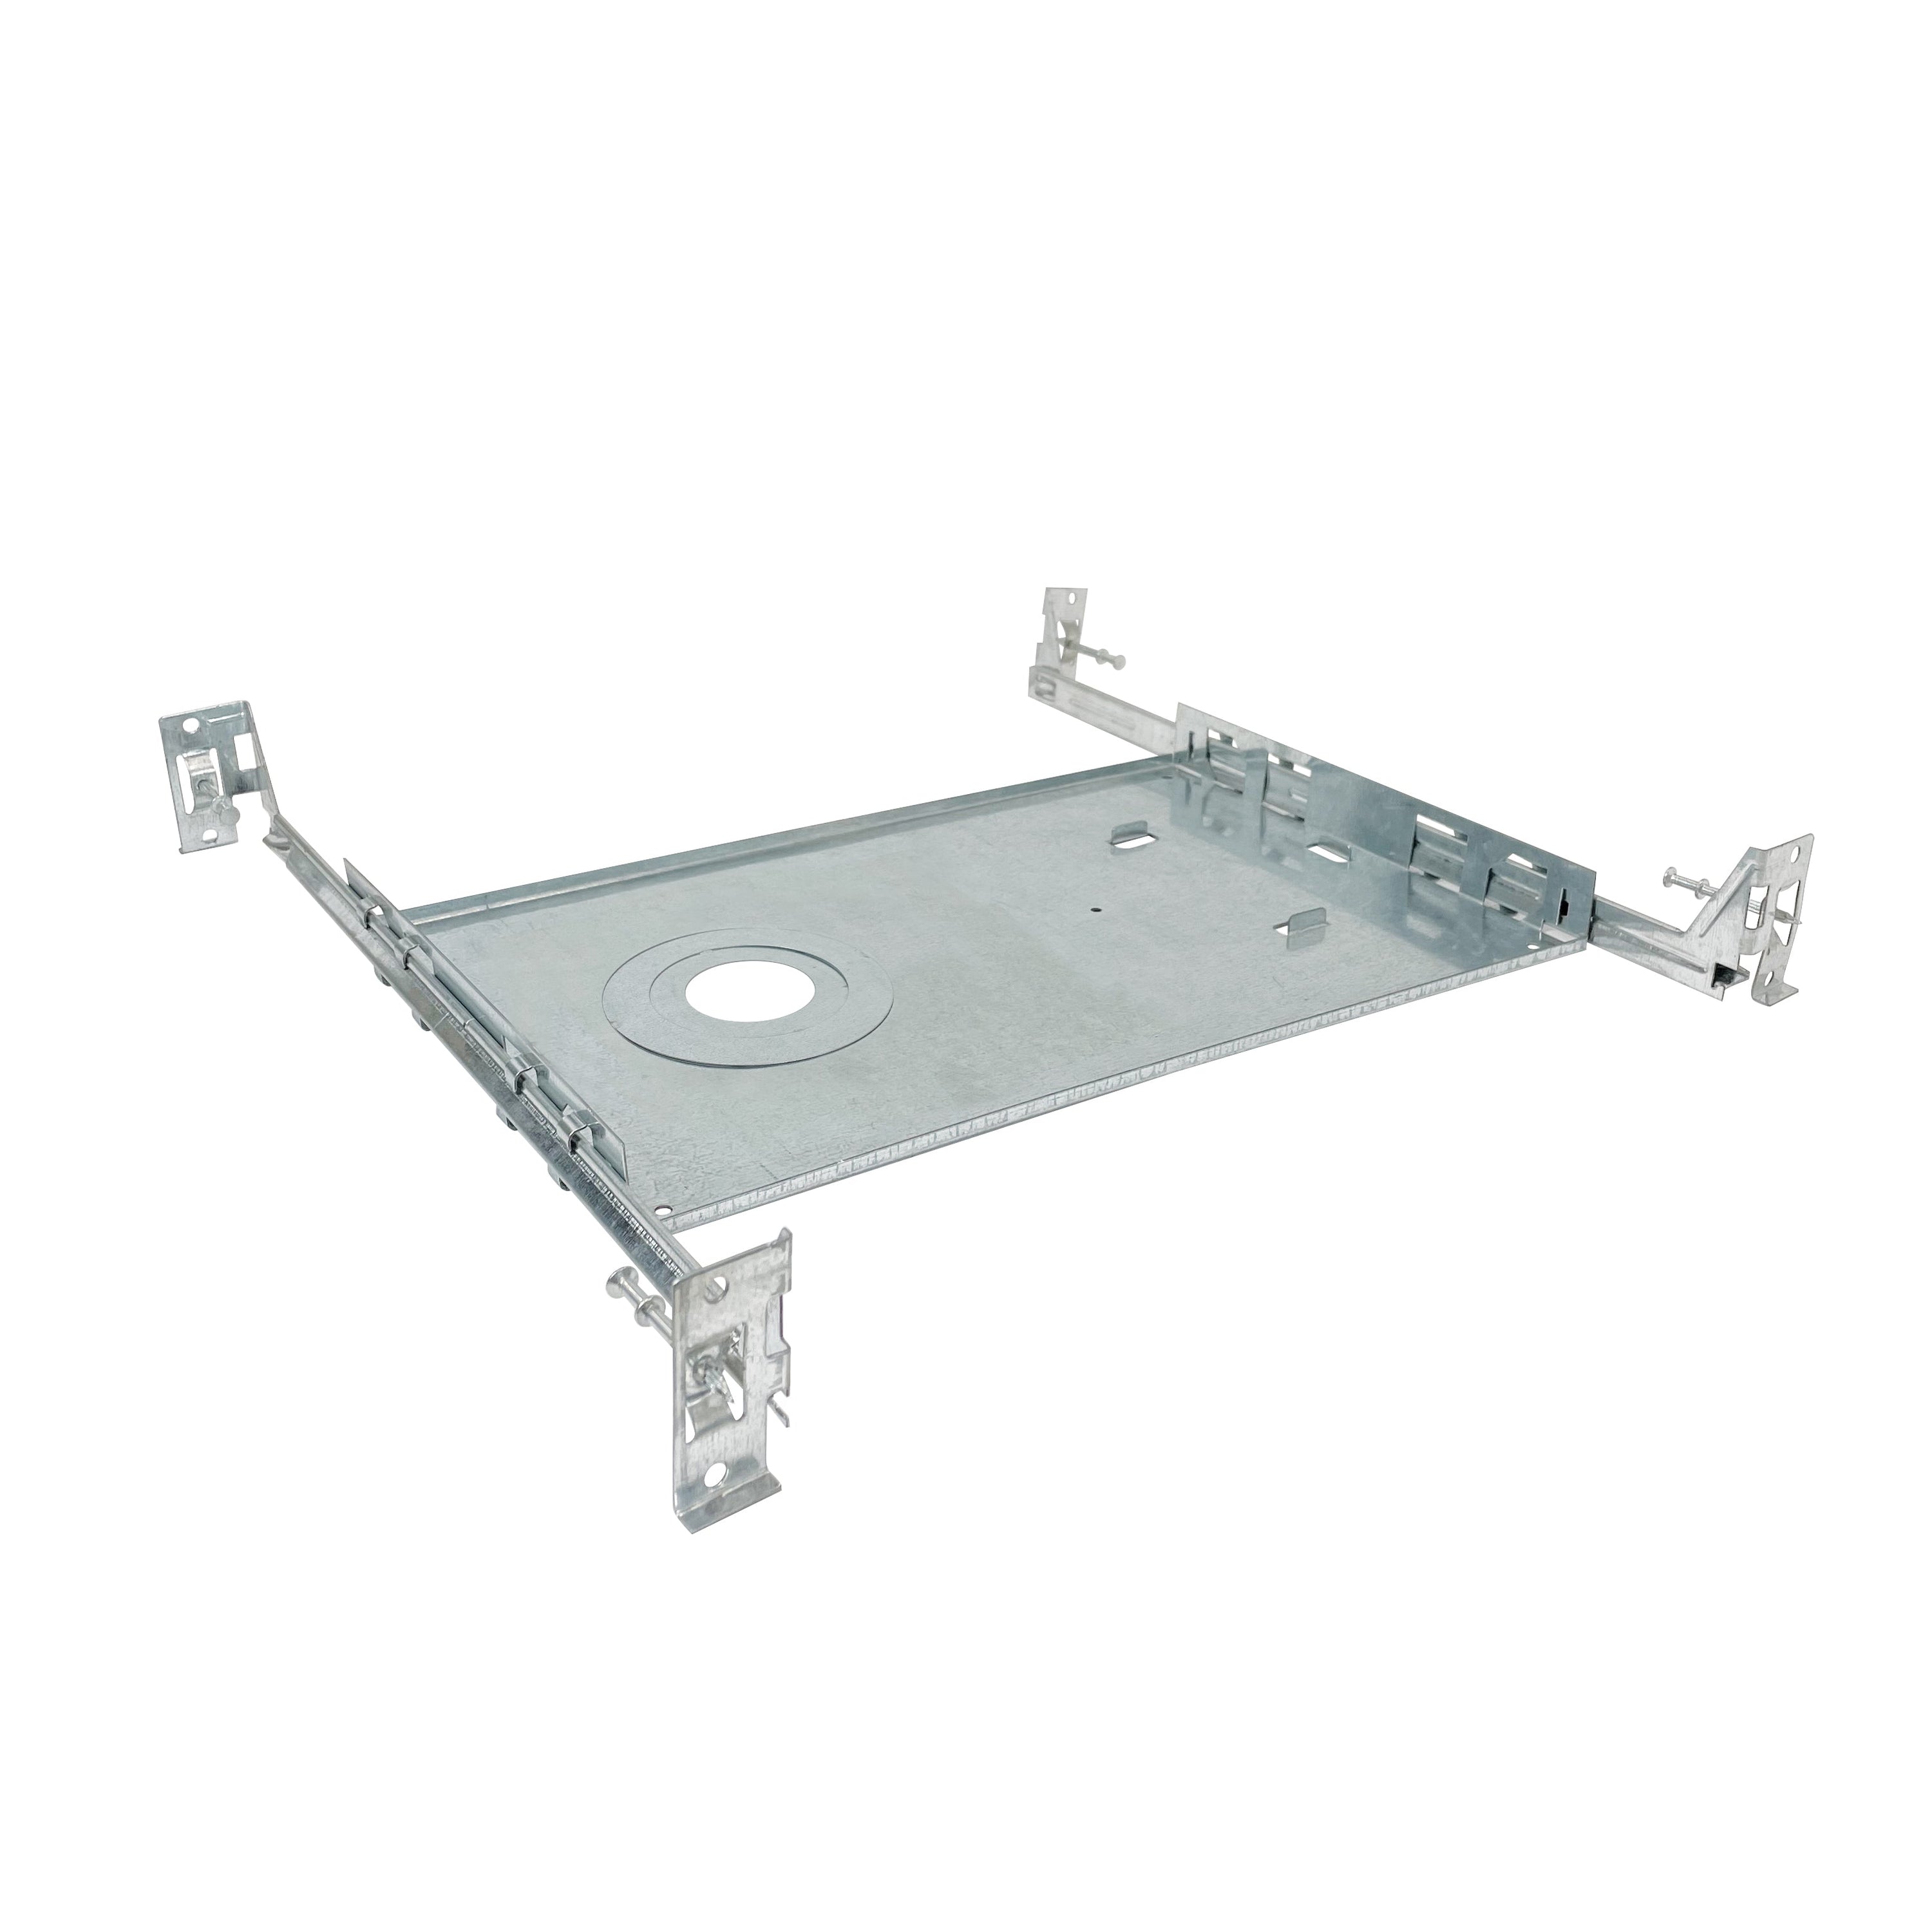 Nora Lighting NF-R124 - Recessed - Universal New Construction Frame-In for 1 Inch, 2 Inch and 4 Inch Can-less Downlights